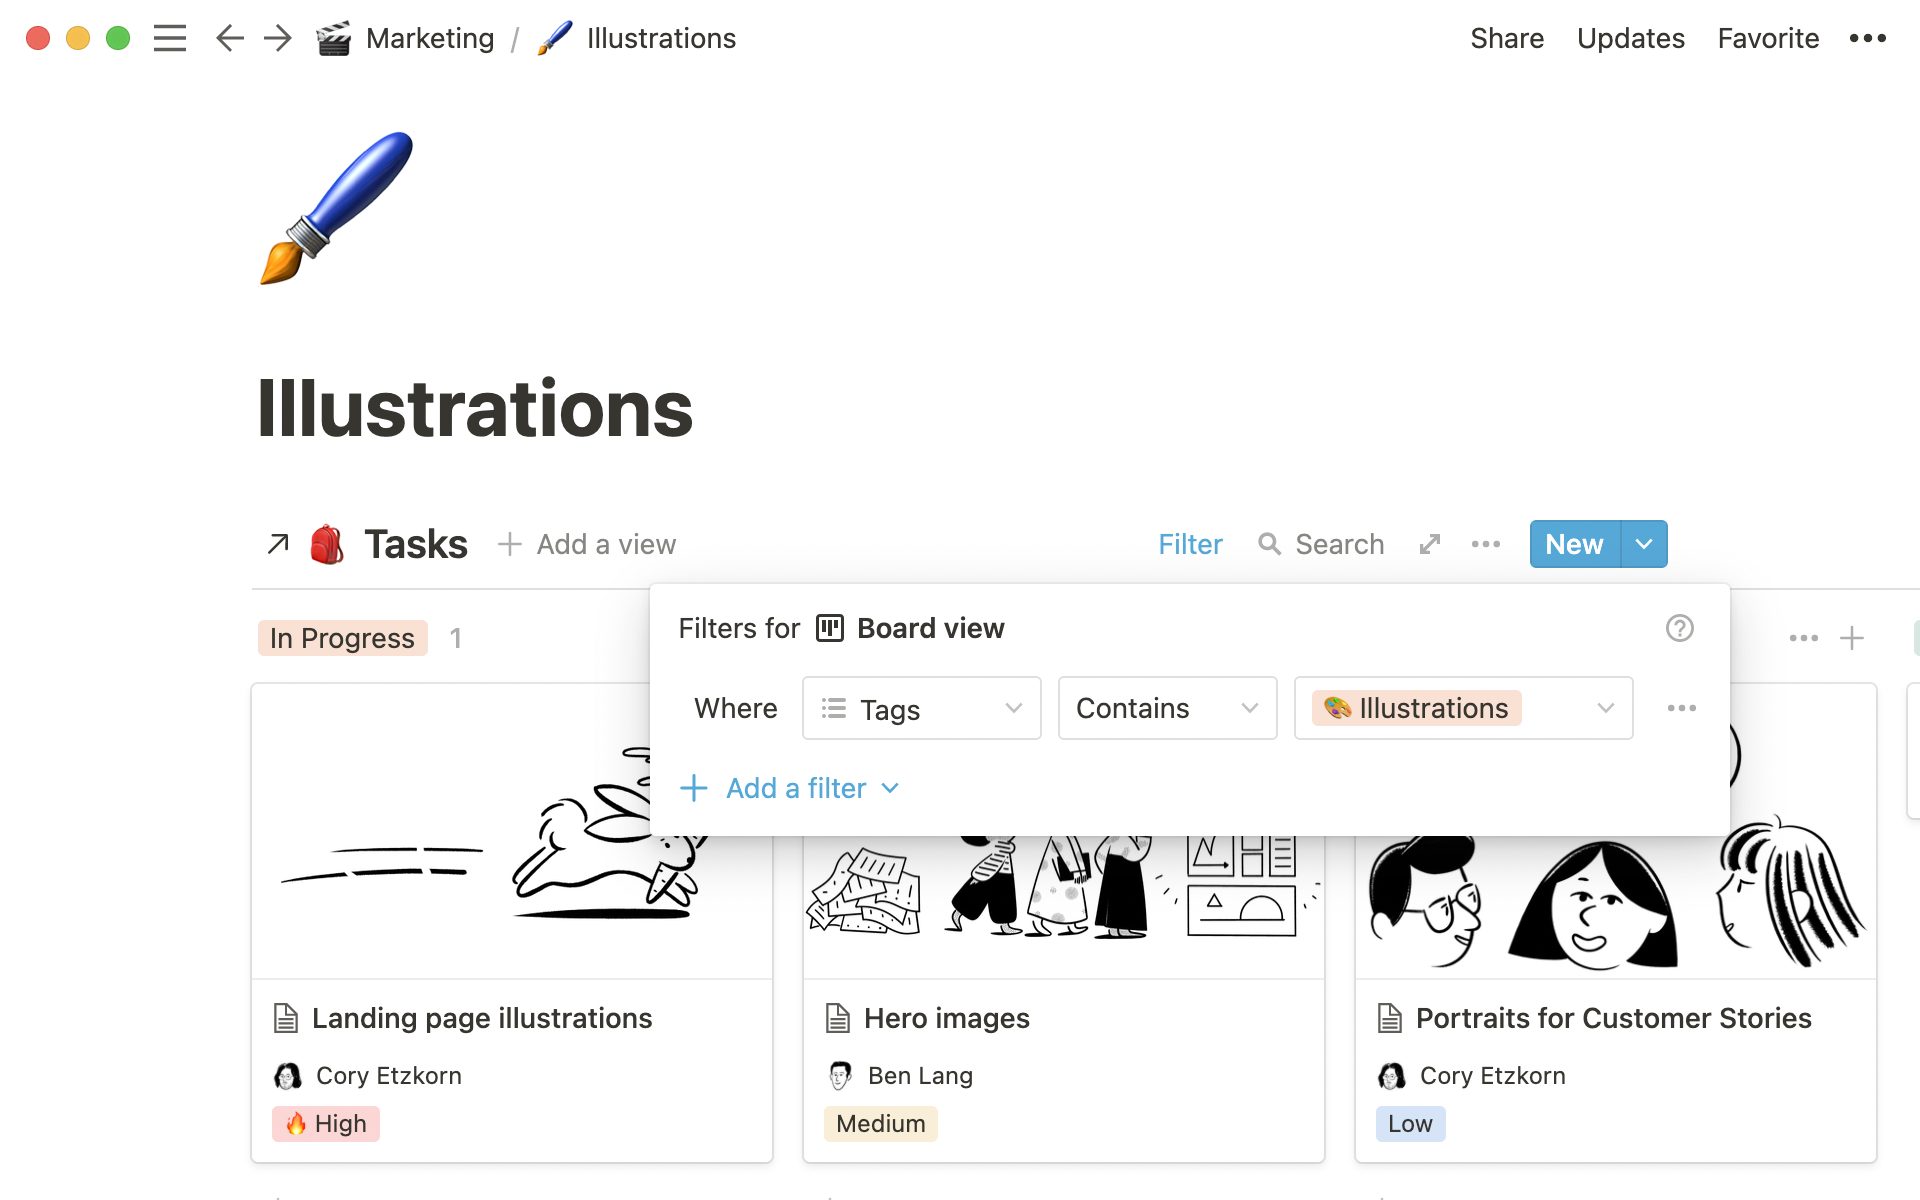 Another view of the tasks database for illustrations.